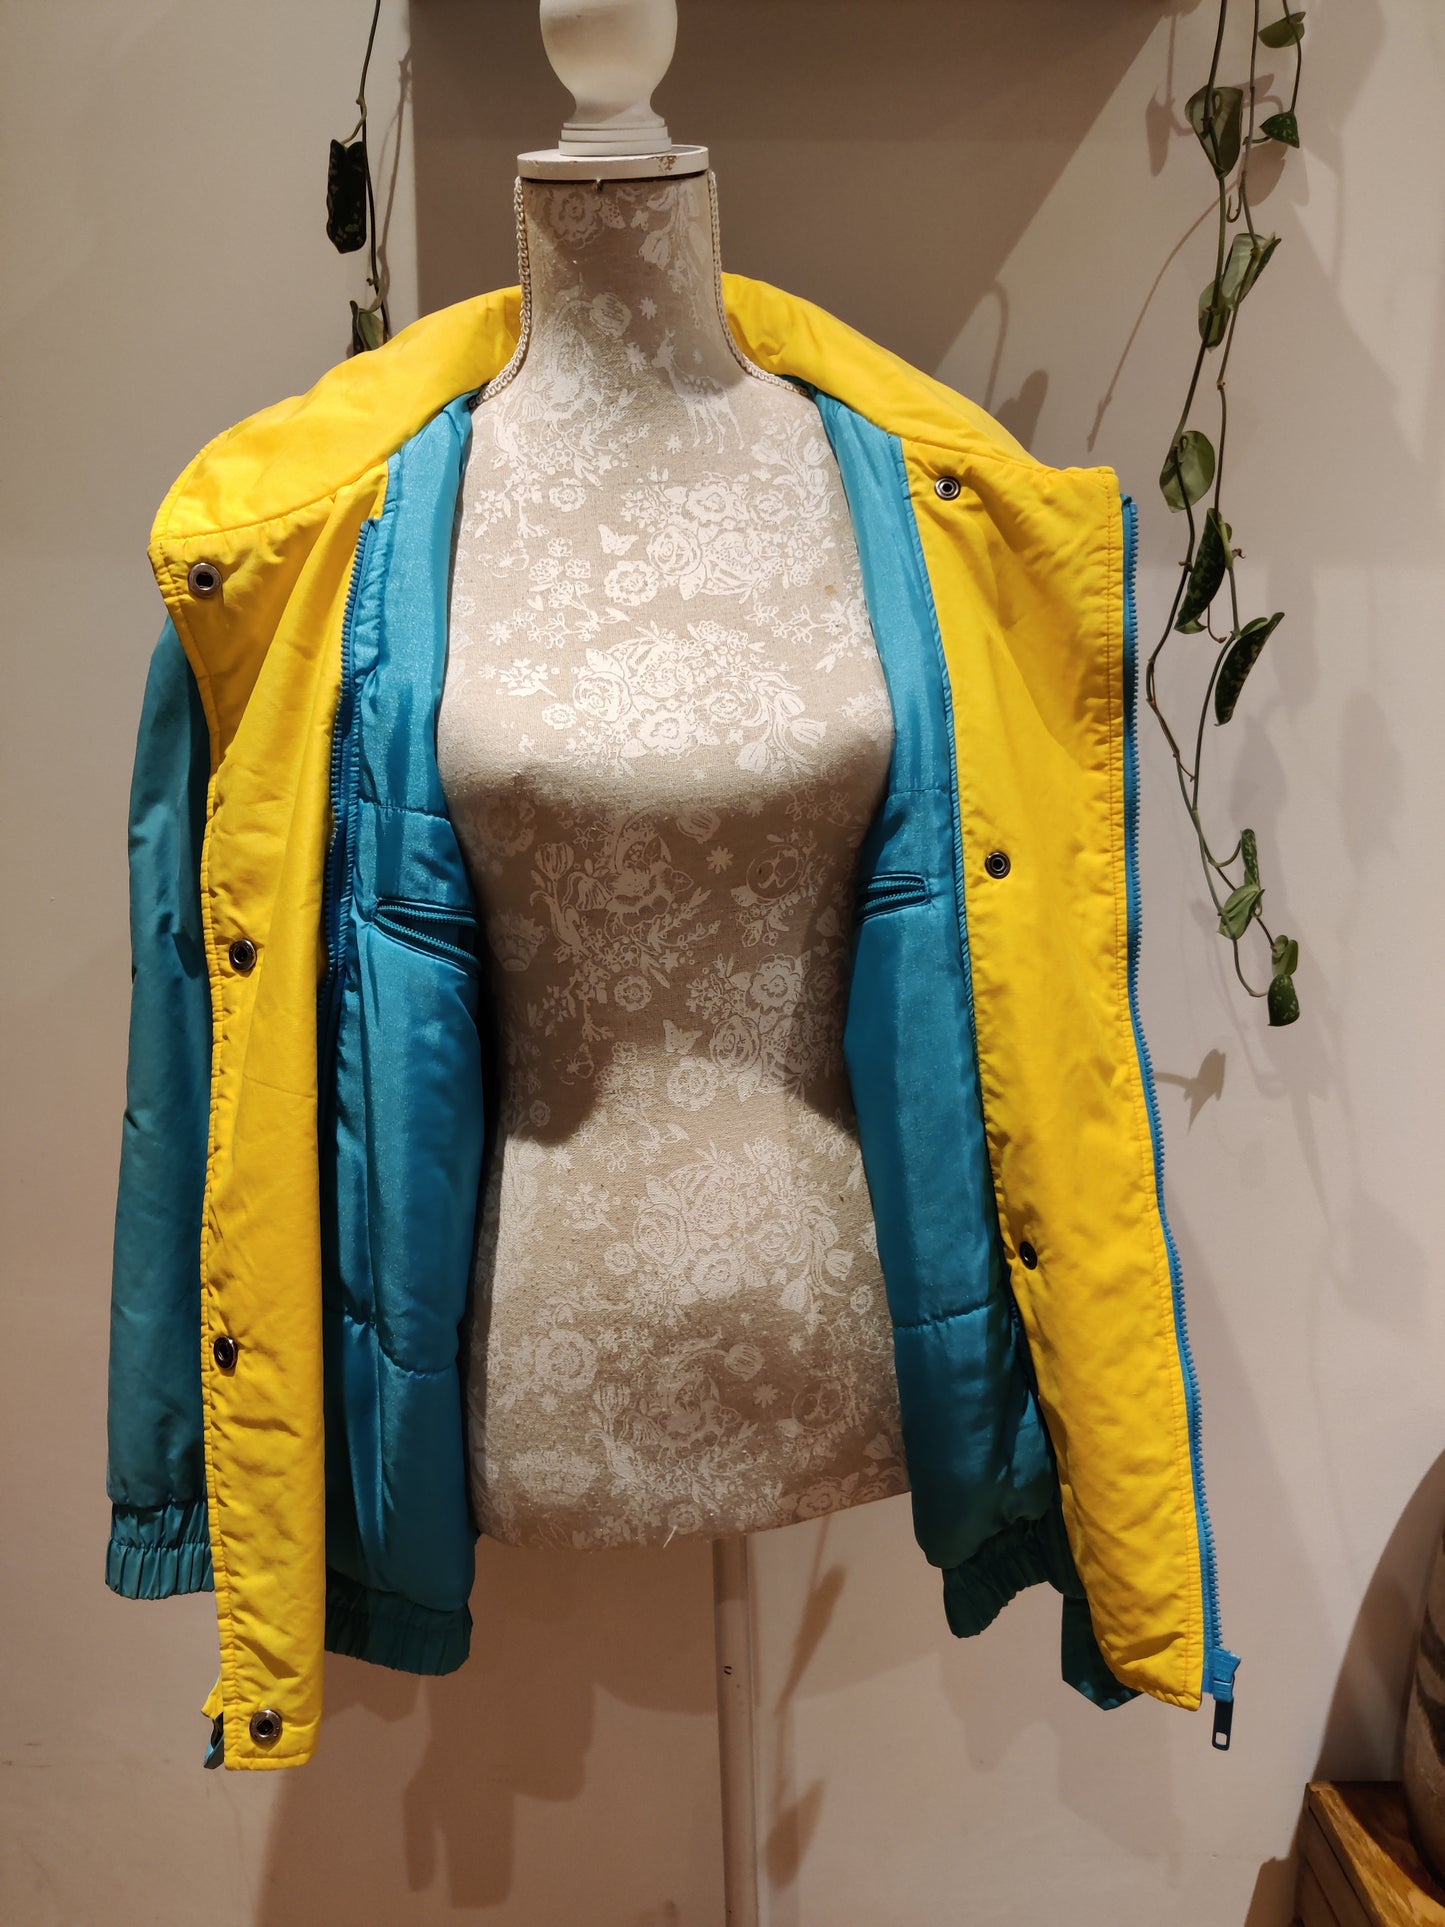 Fun 80s jacket for sale